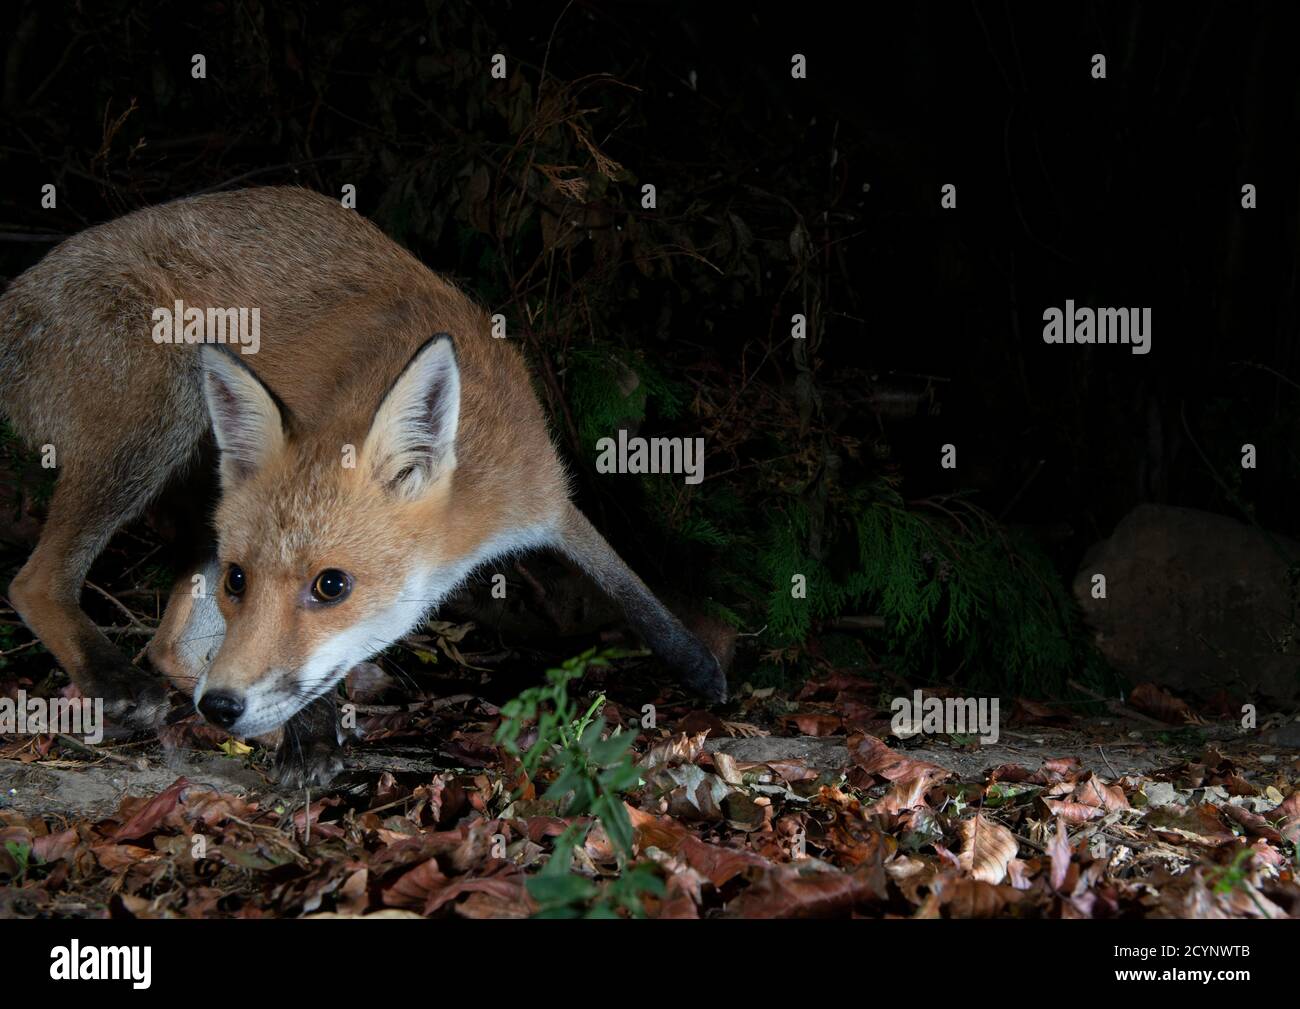 Fox on lefthand side of picture with curled body crouching low in defence, challenging or looking curious posture Stock Photo